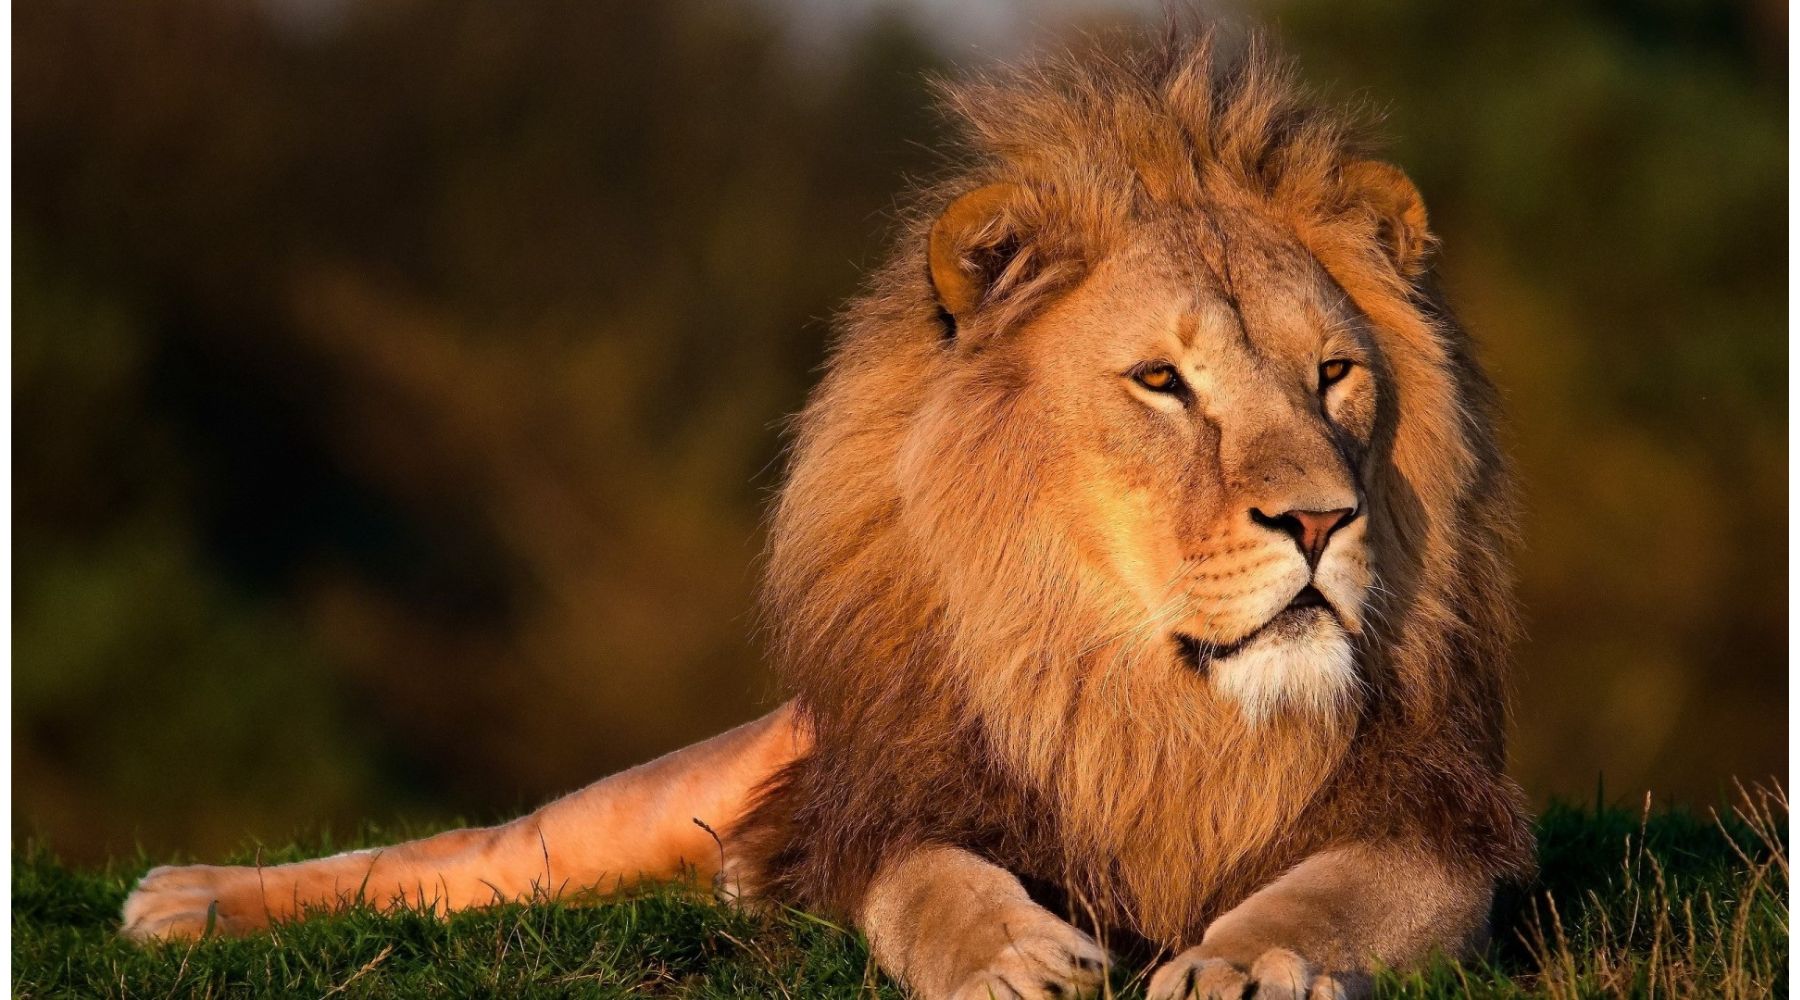 Wonders of Wildlife, Facts About Lions - FOREVER WILDLIFE